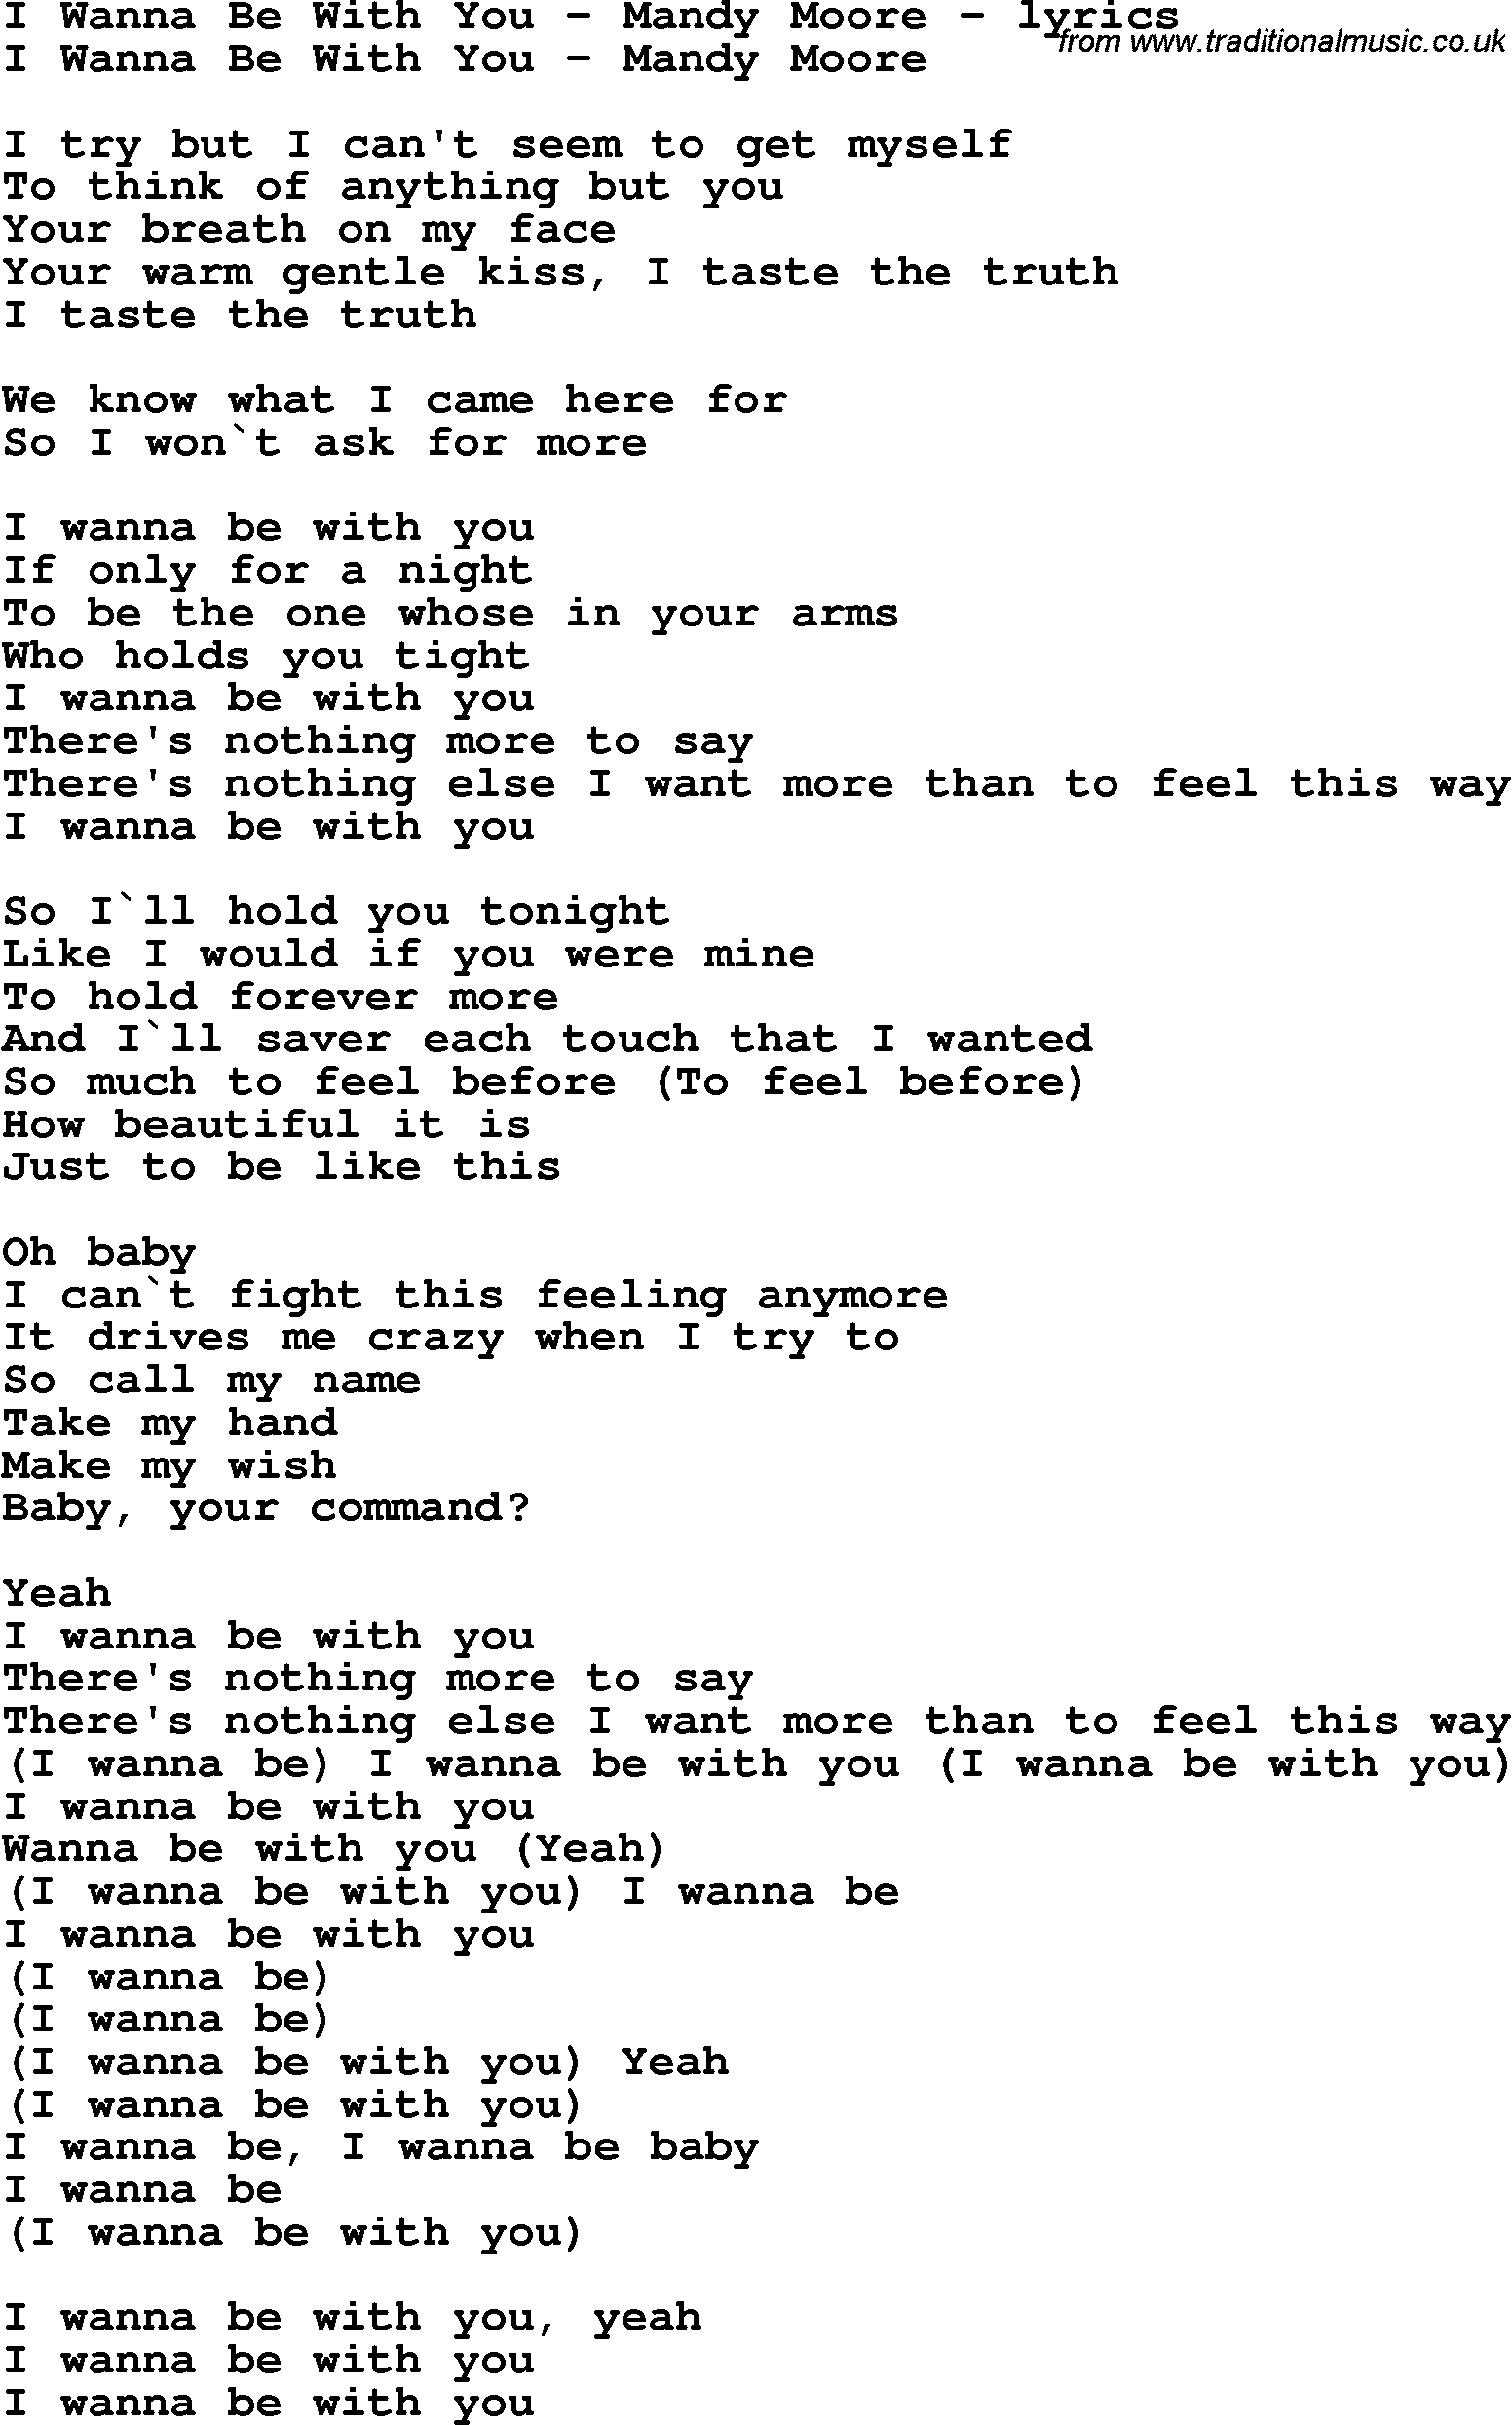 Love Song Lyrics for: I Wanna Be With You - Mandy Moore